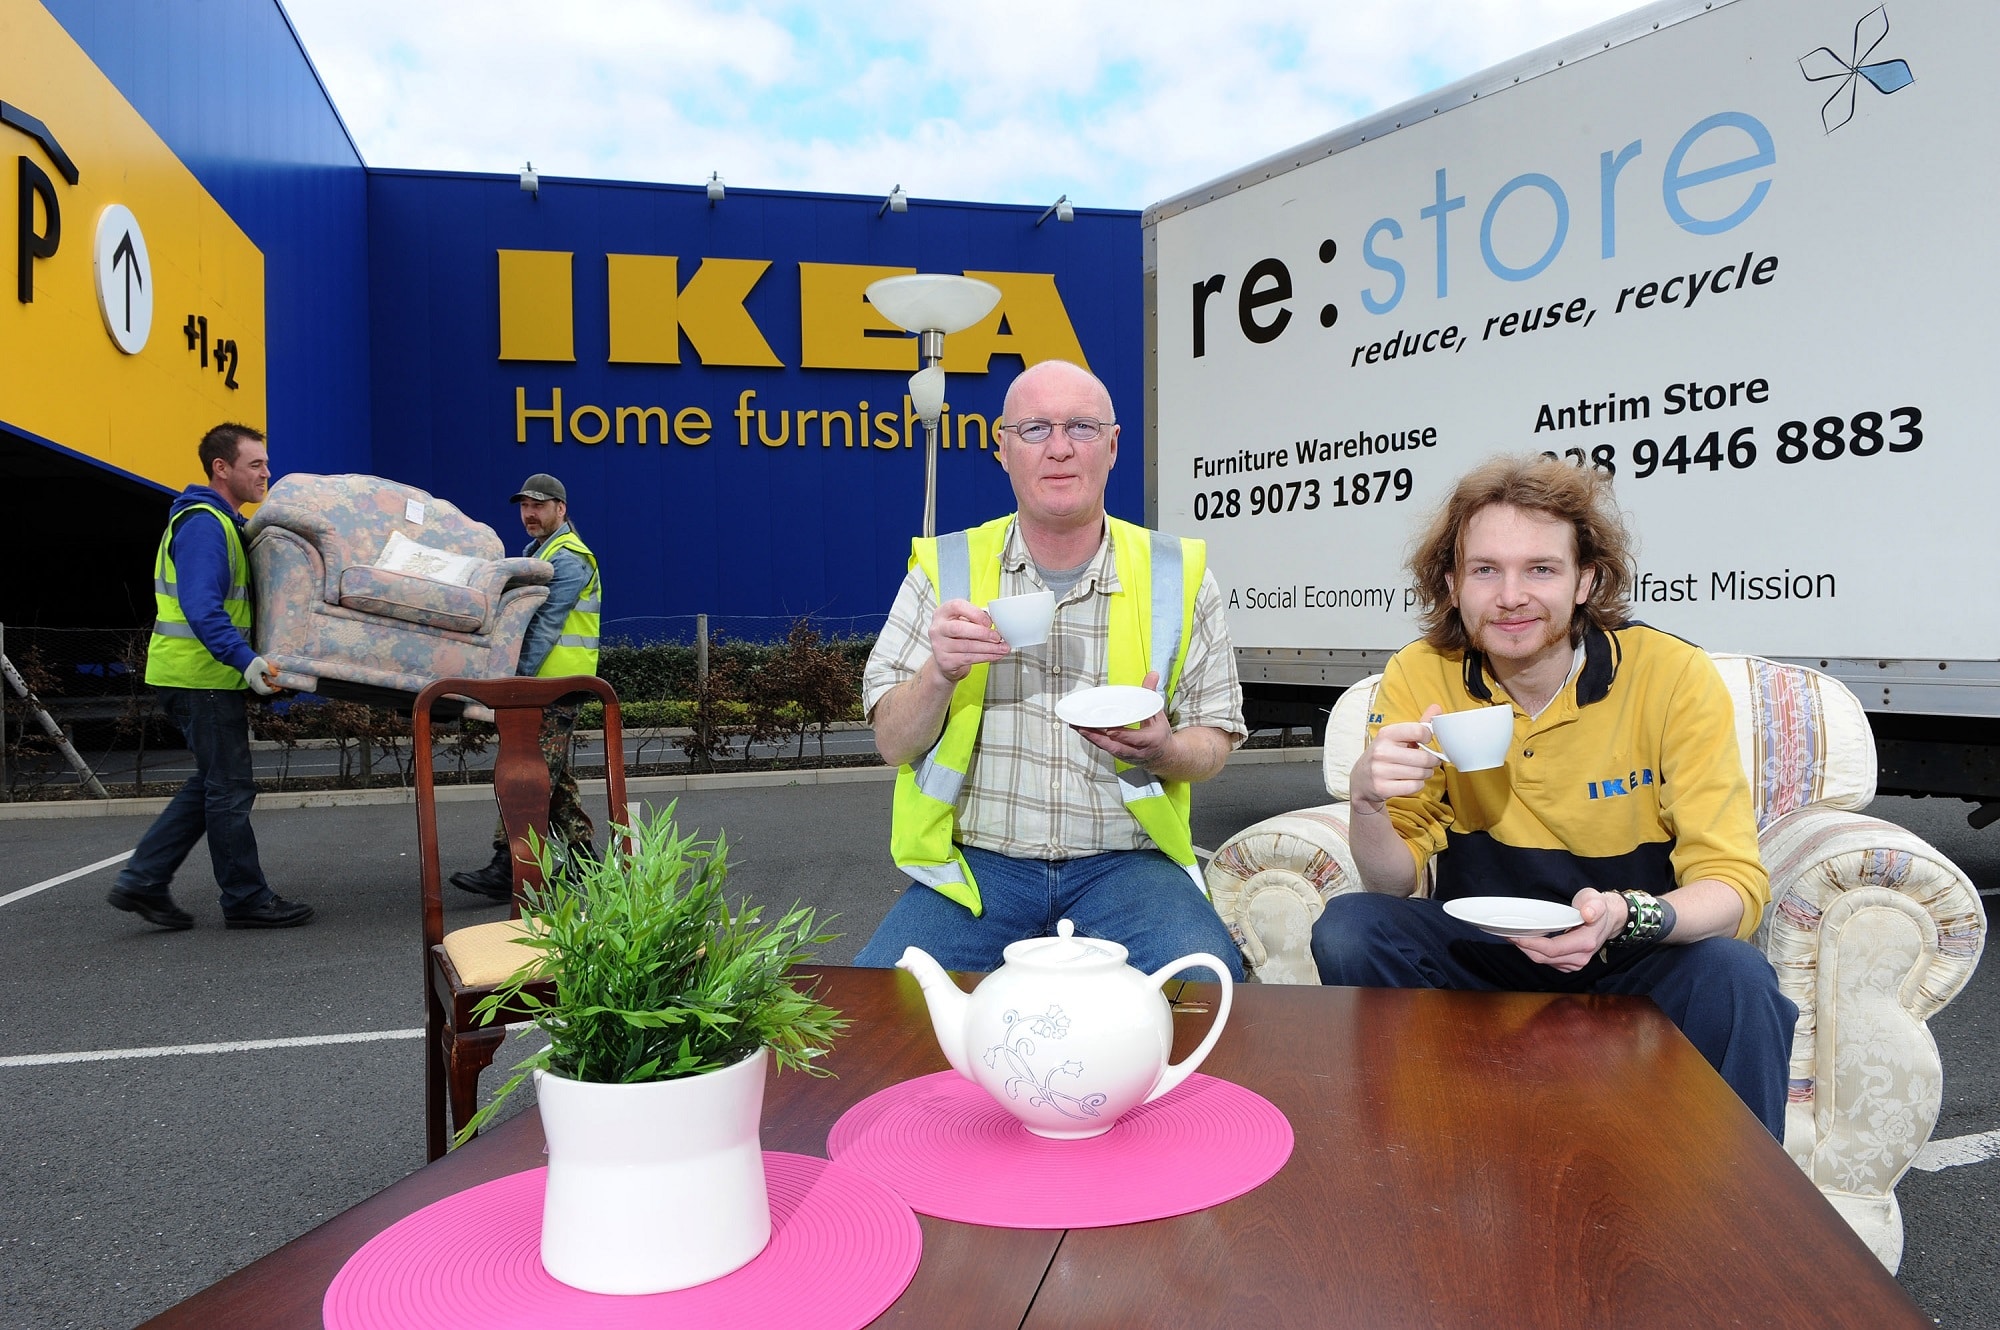 Corporate retailers support re-use with impressive impacts